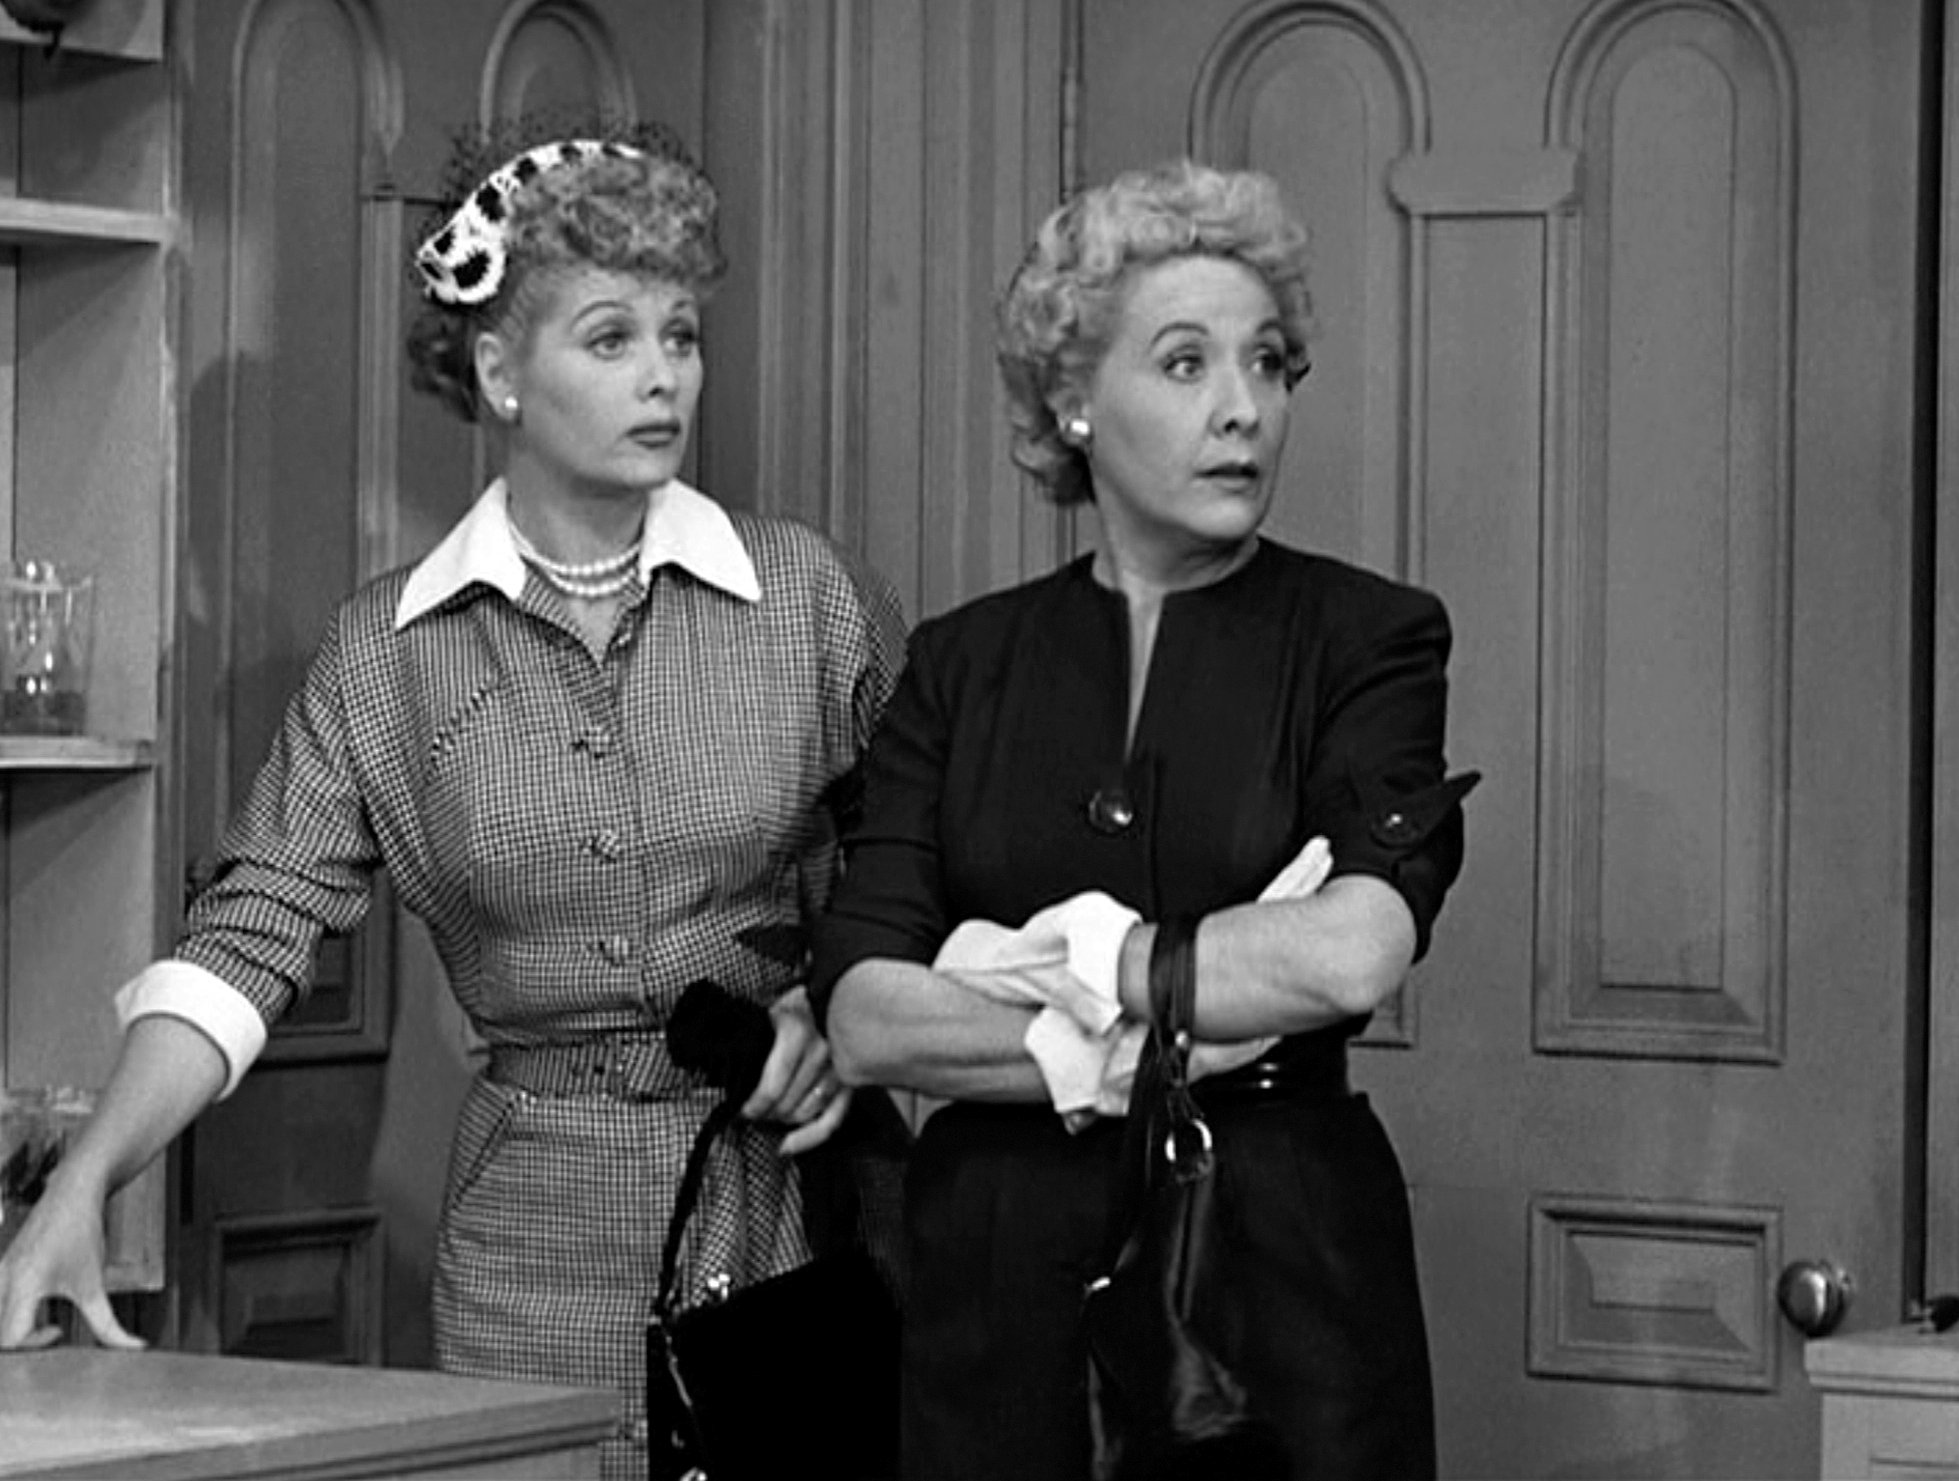 ‘I Love Lucy’: Lucille Ball Was Inspired by This Comedy Legend for an Iconic Episode